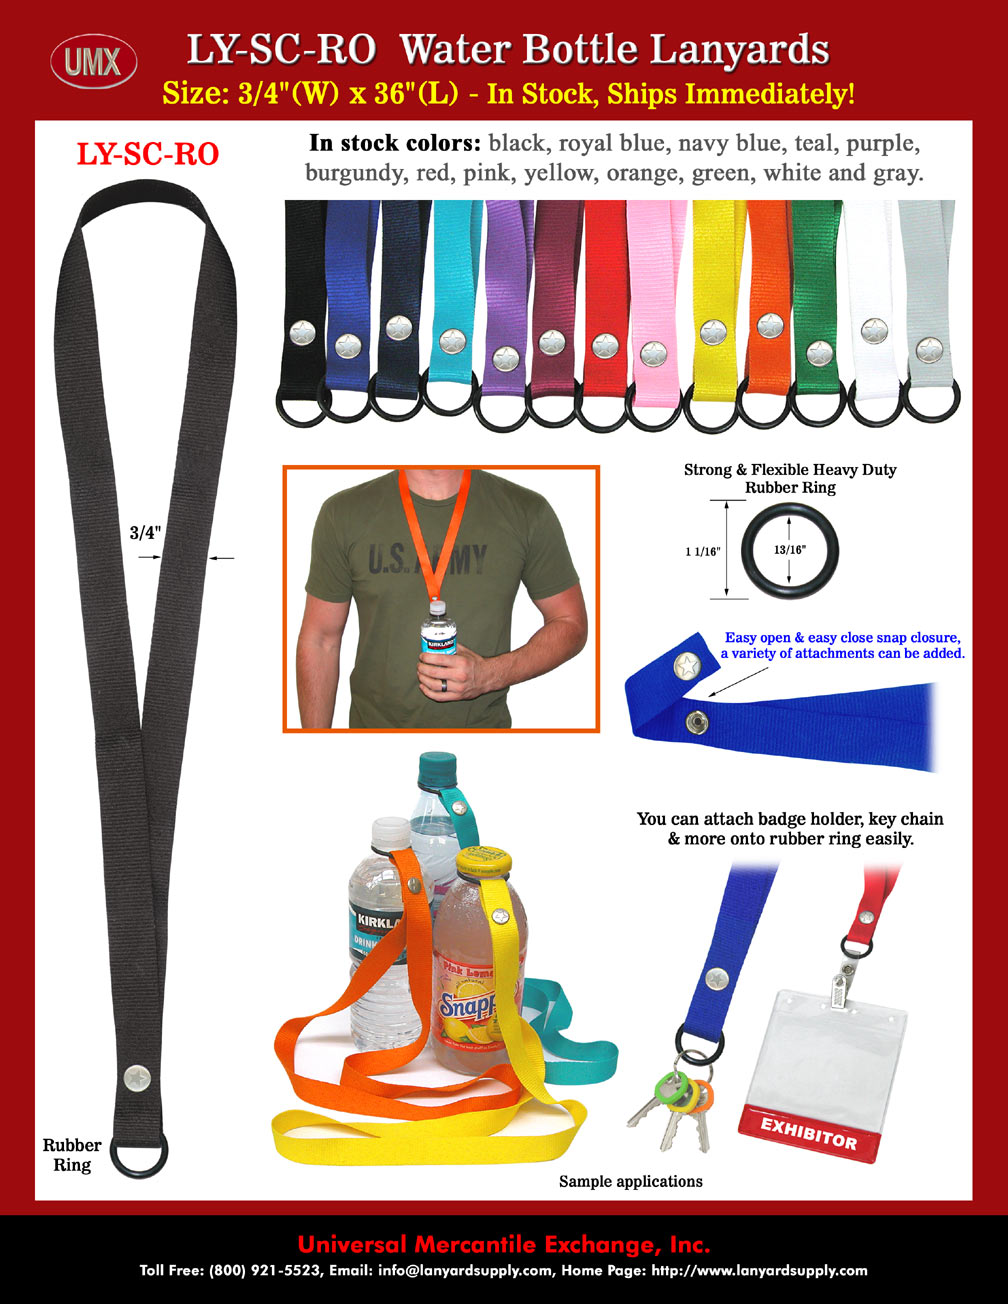 Bottle Cap Lanyards - 3/4" Low Cost Simple Snap-On Bottle Cap Lanyards For Bottled Drinks With 13-Colors In Stock.